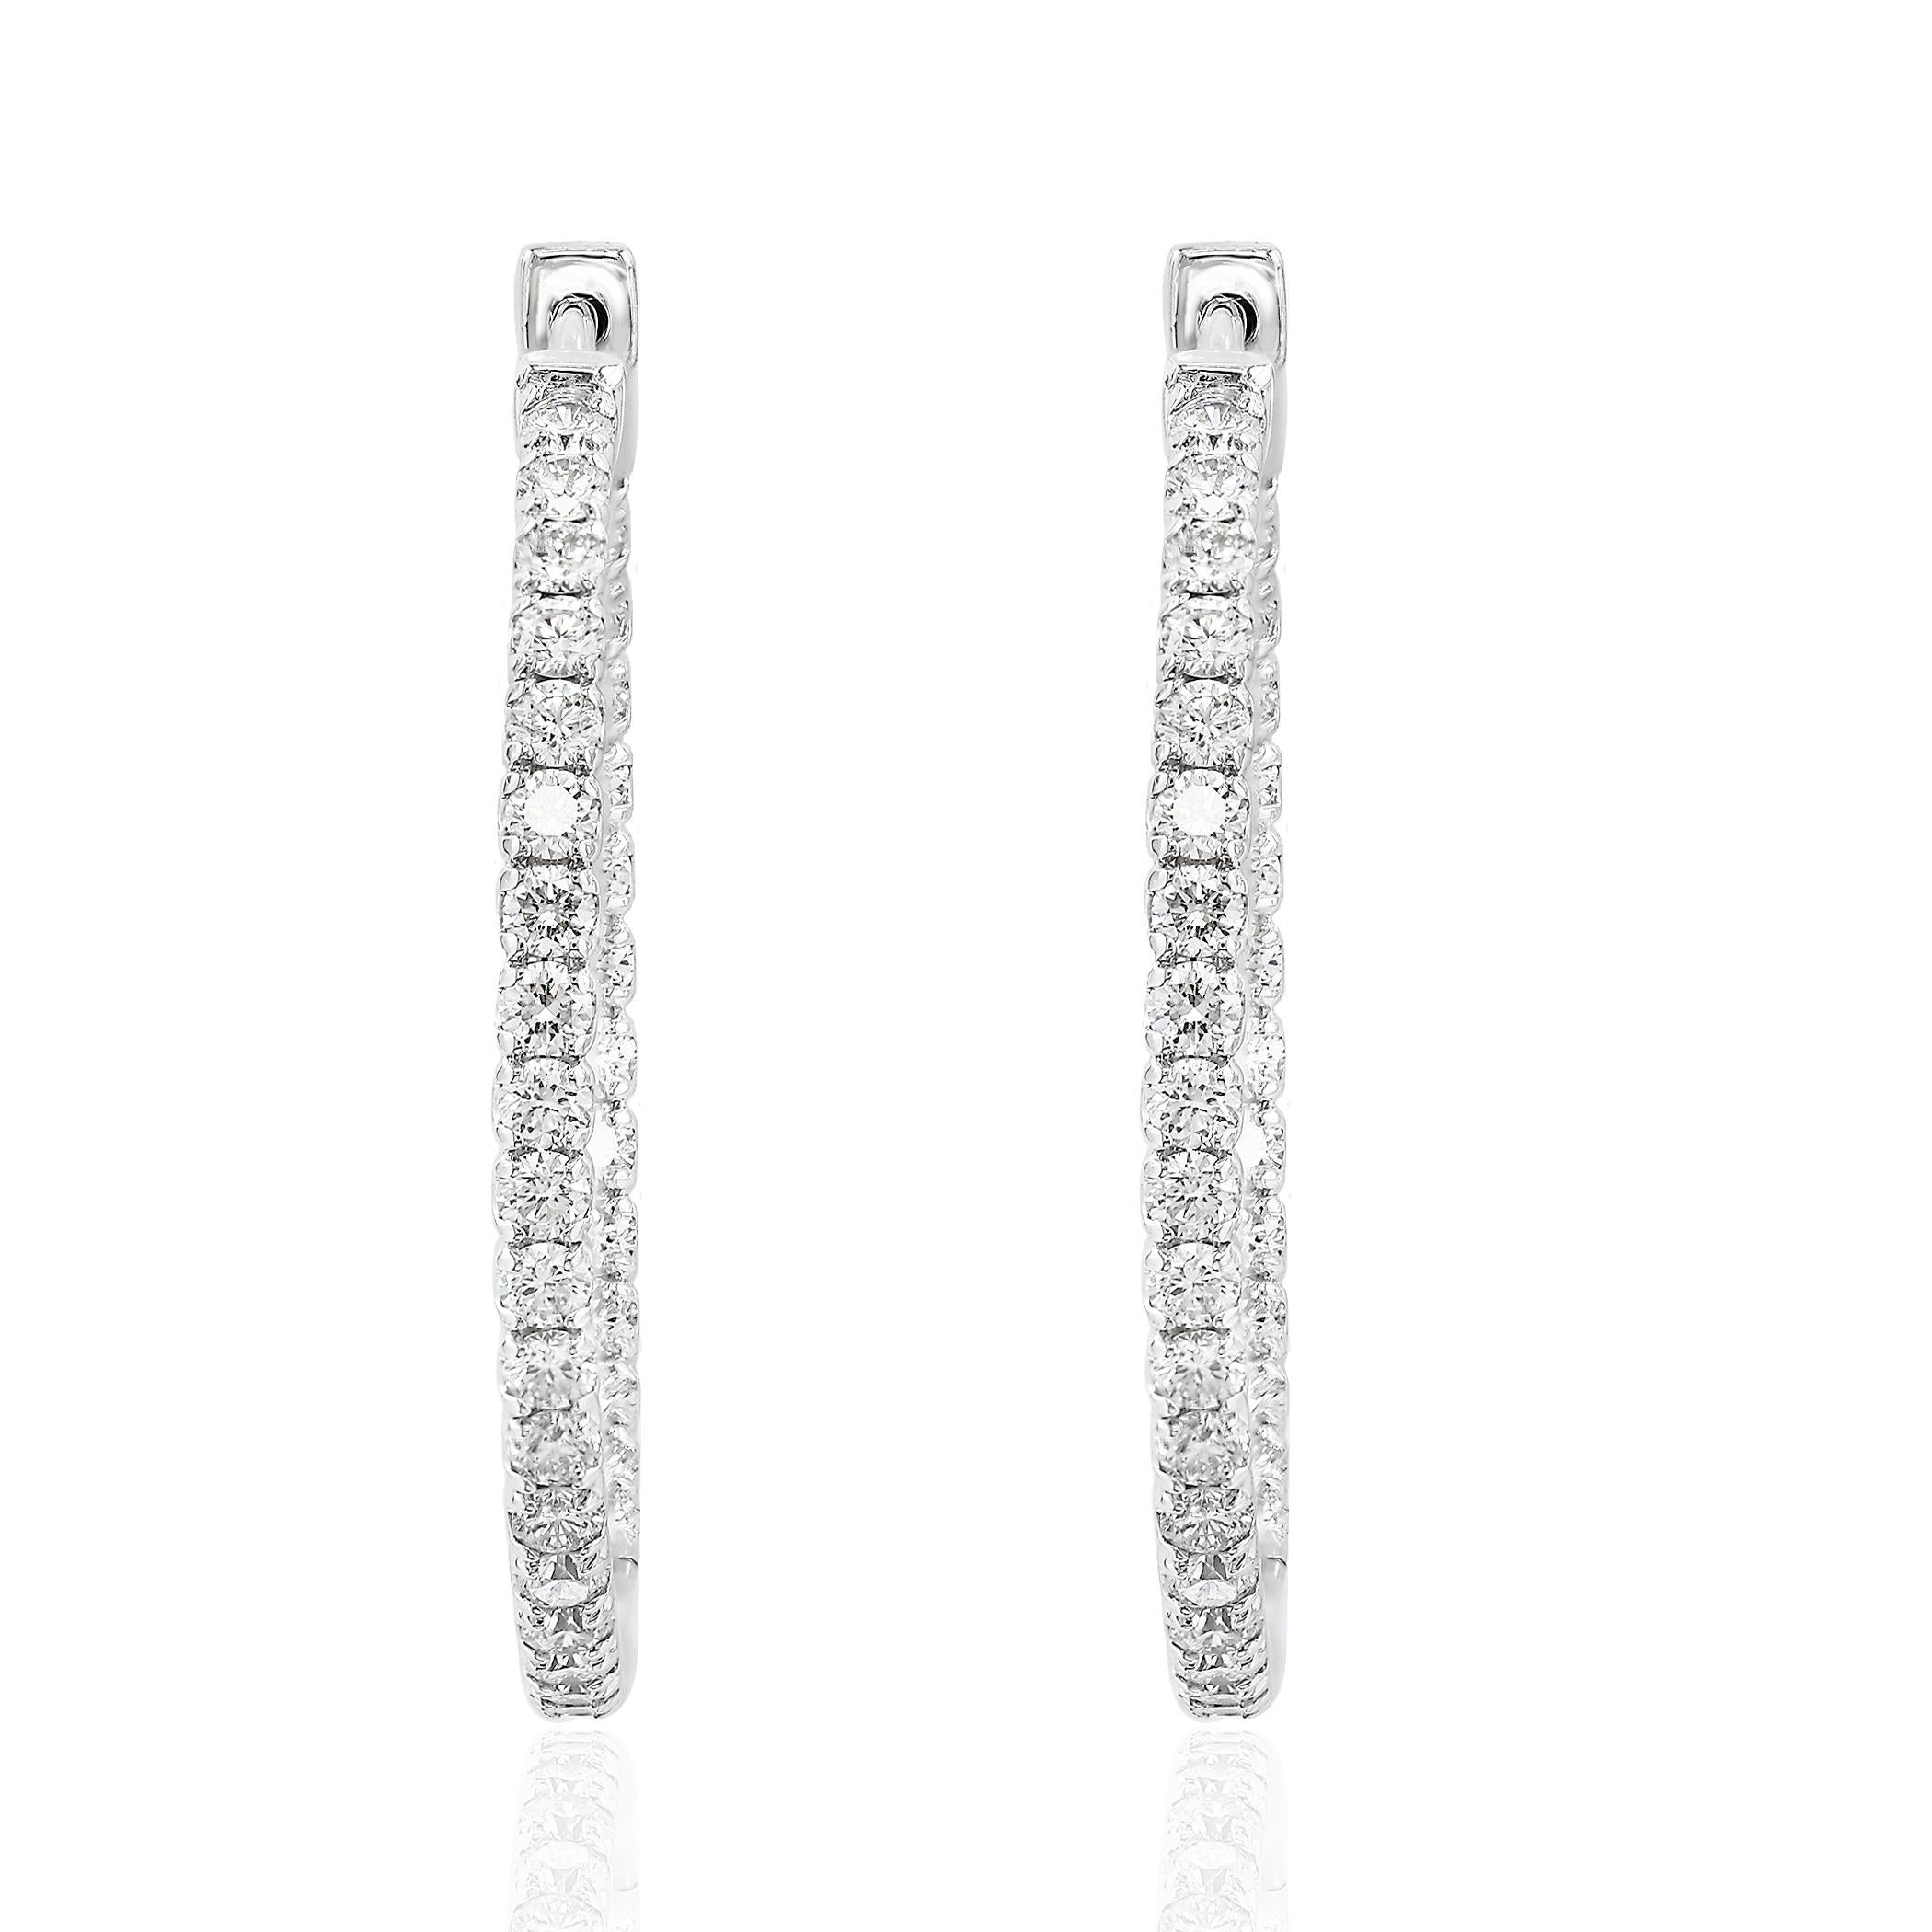 A chic and fashionable pair of hoop earrings showcasing  round diamonds, set in 14k white gold.  Round diamonds weigh 1.53 carats total. A beautiful piece of jewelry.


All diamonds are GH color SI1 Clarity.
Available in Yellow and Rose Gold as